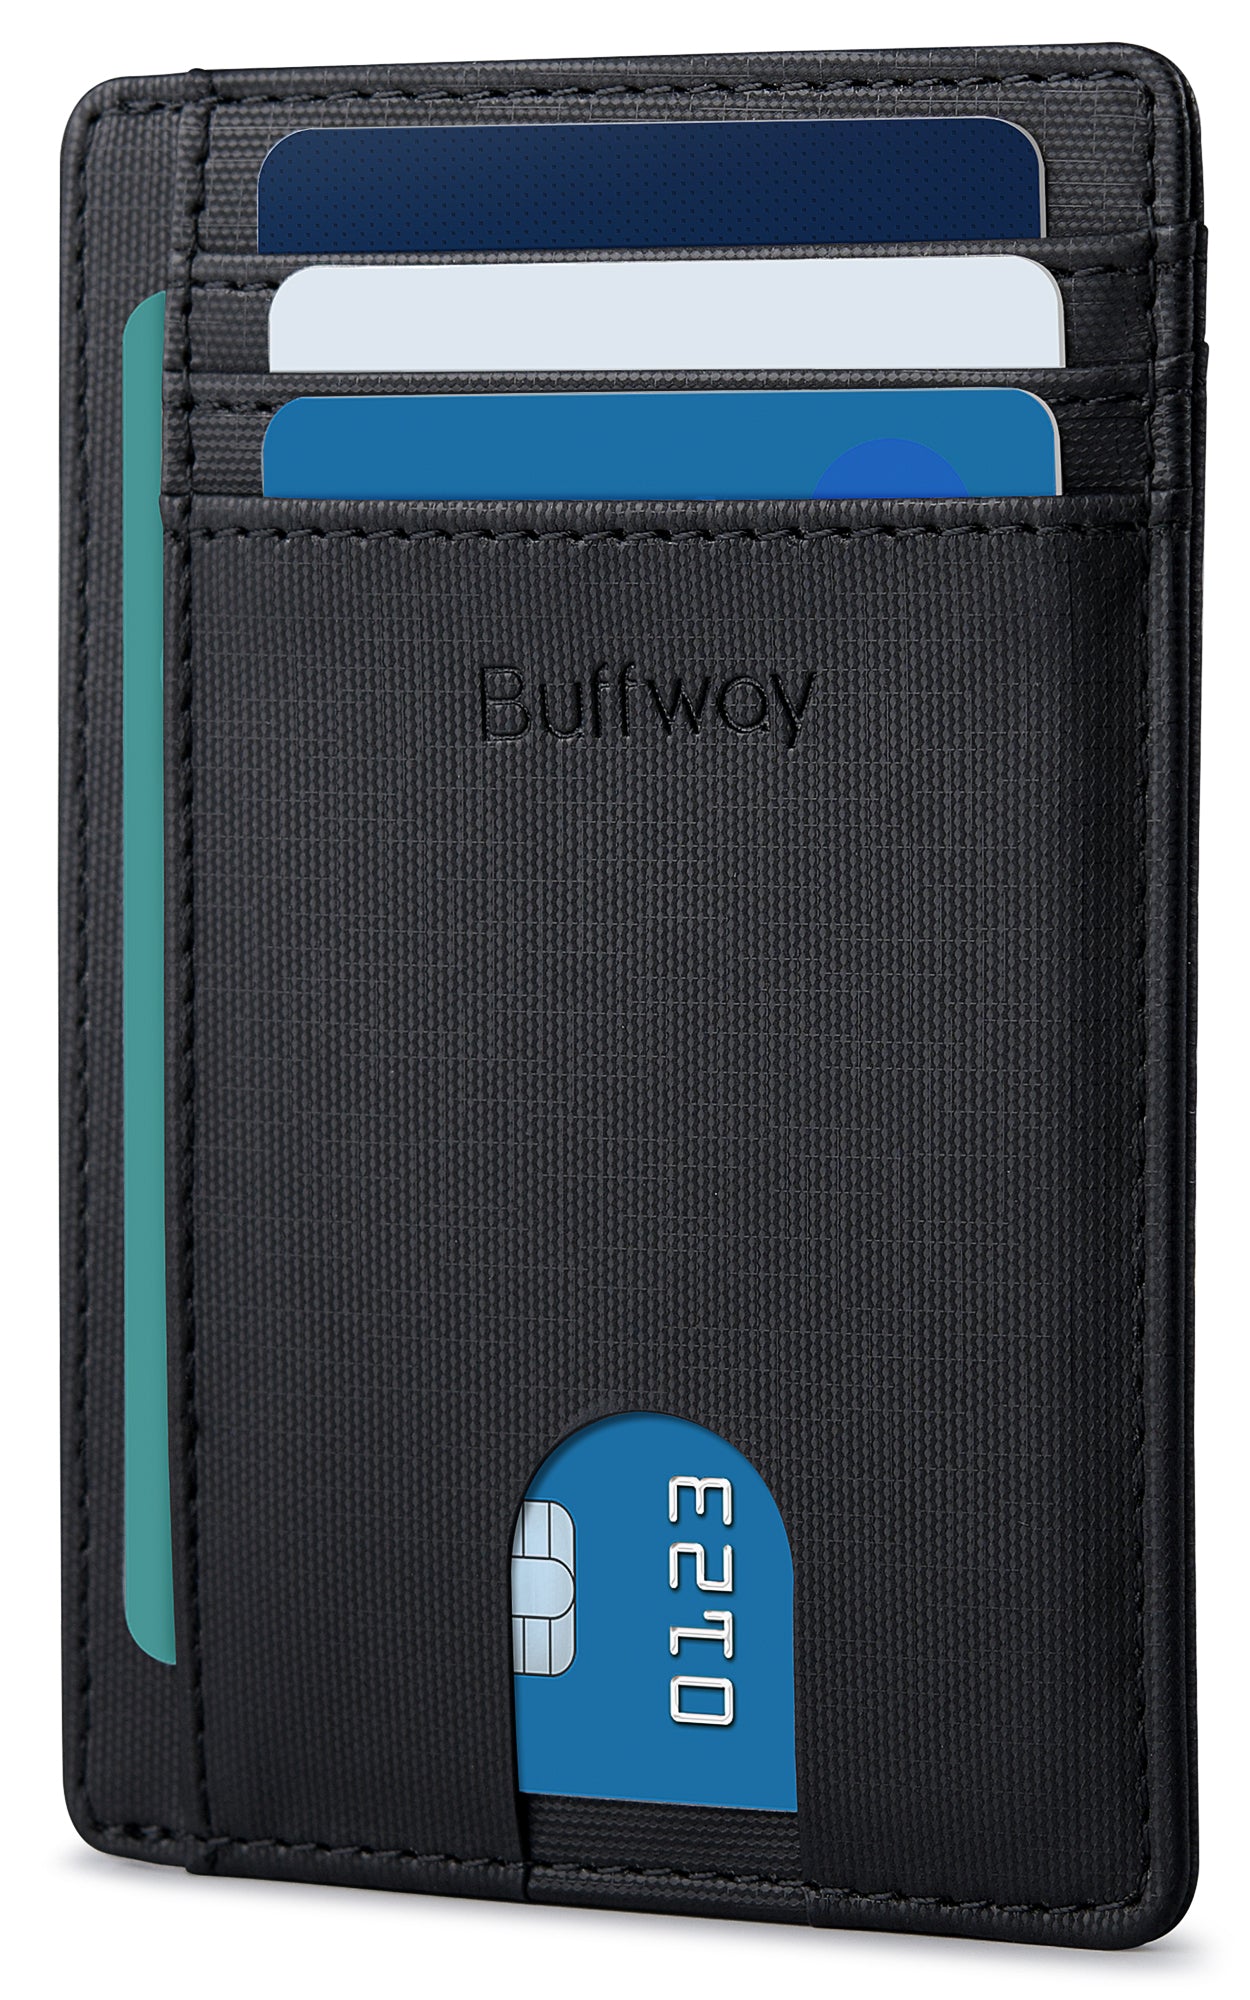 Buffway Slim Minimalist Front Pocket RFID Blocking Leather Wallets for Men and Women - Galaxy Black